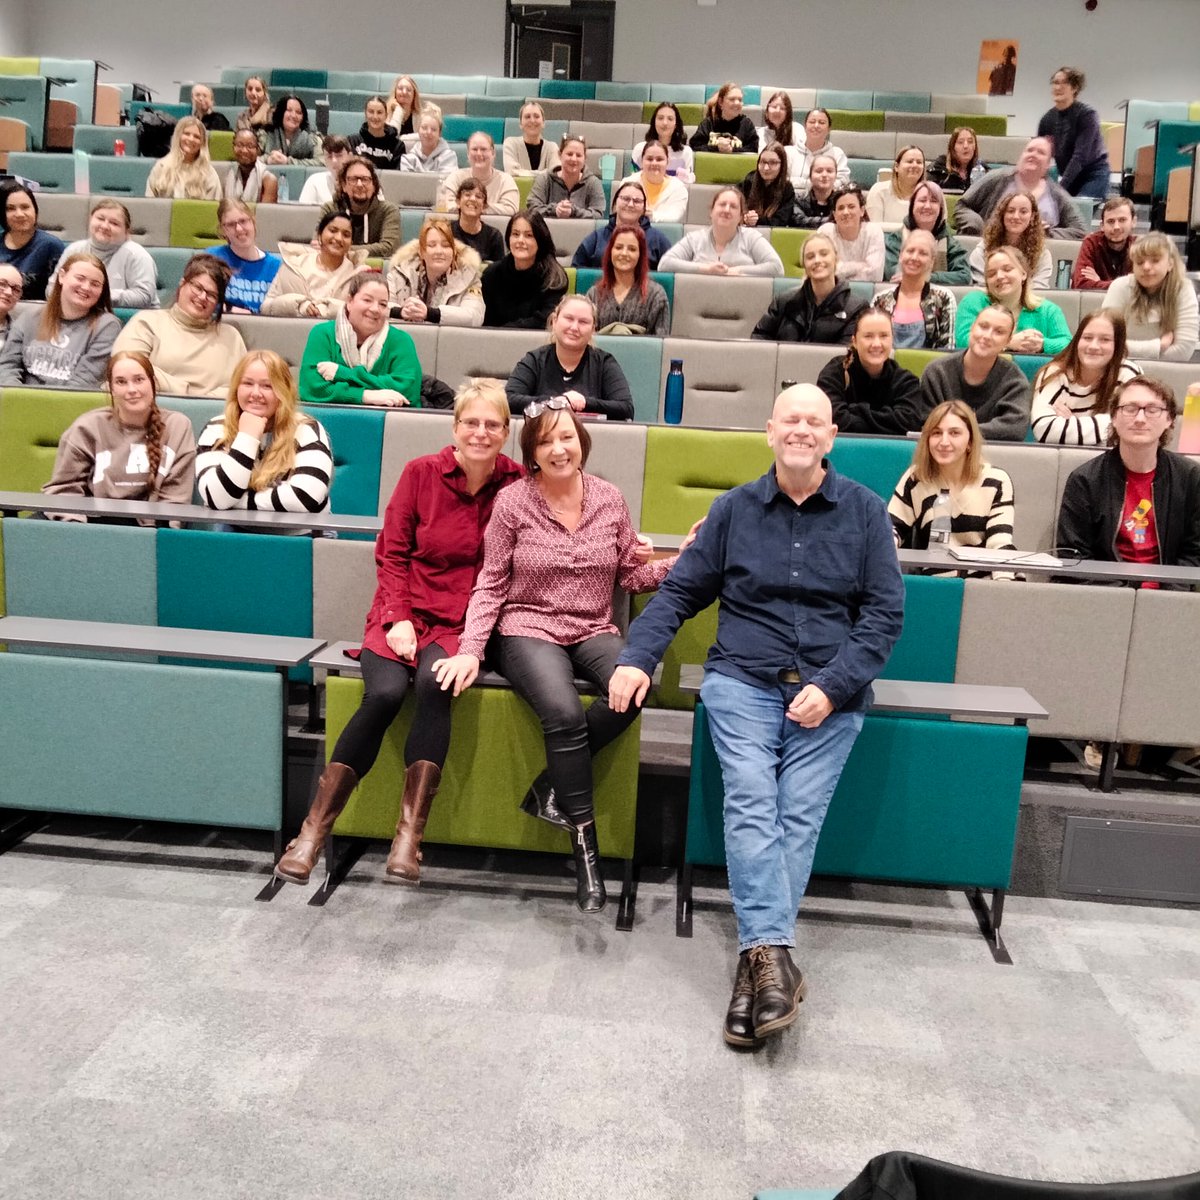 Fabulous session with our pre-reg nursing students today listening to the lived experiences of stroke with our guest speakers, Ali & Alan Hampson. Thankyou for your time and commitment! #thepowerofstories @CumbriaUHealth @LisaWinterSmith @louisecorless1 @karenstansfiel3